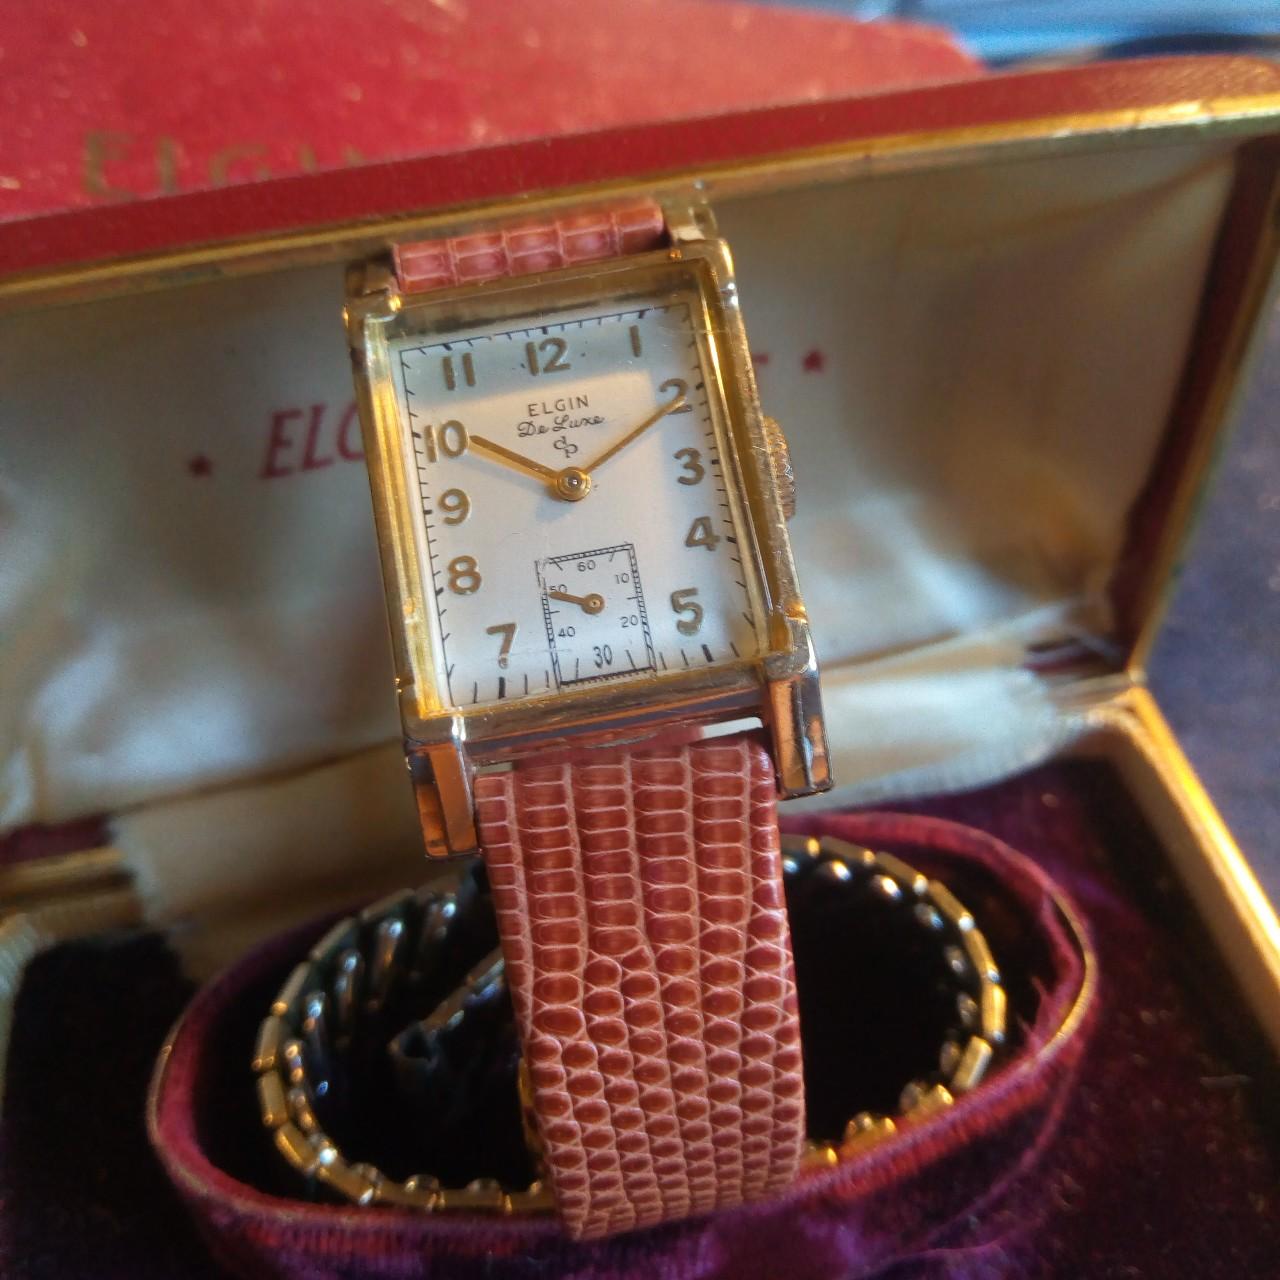 Sold at Auction: Vintage Elgin DeLuxe Wrist Watch